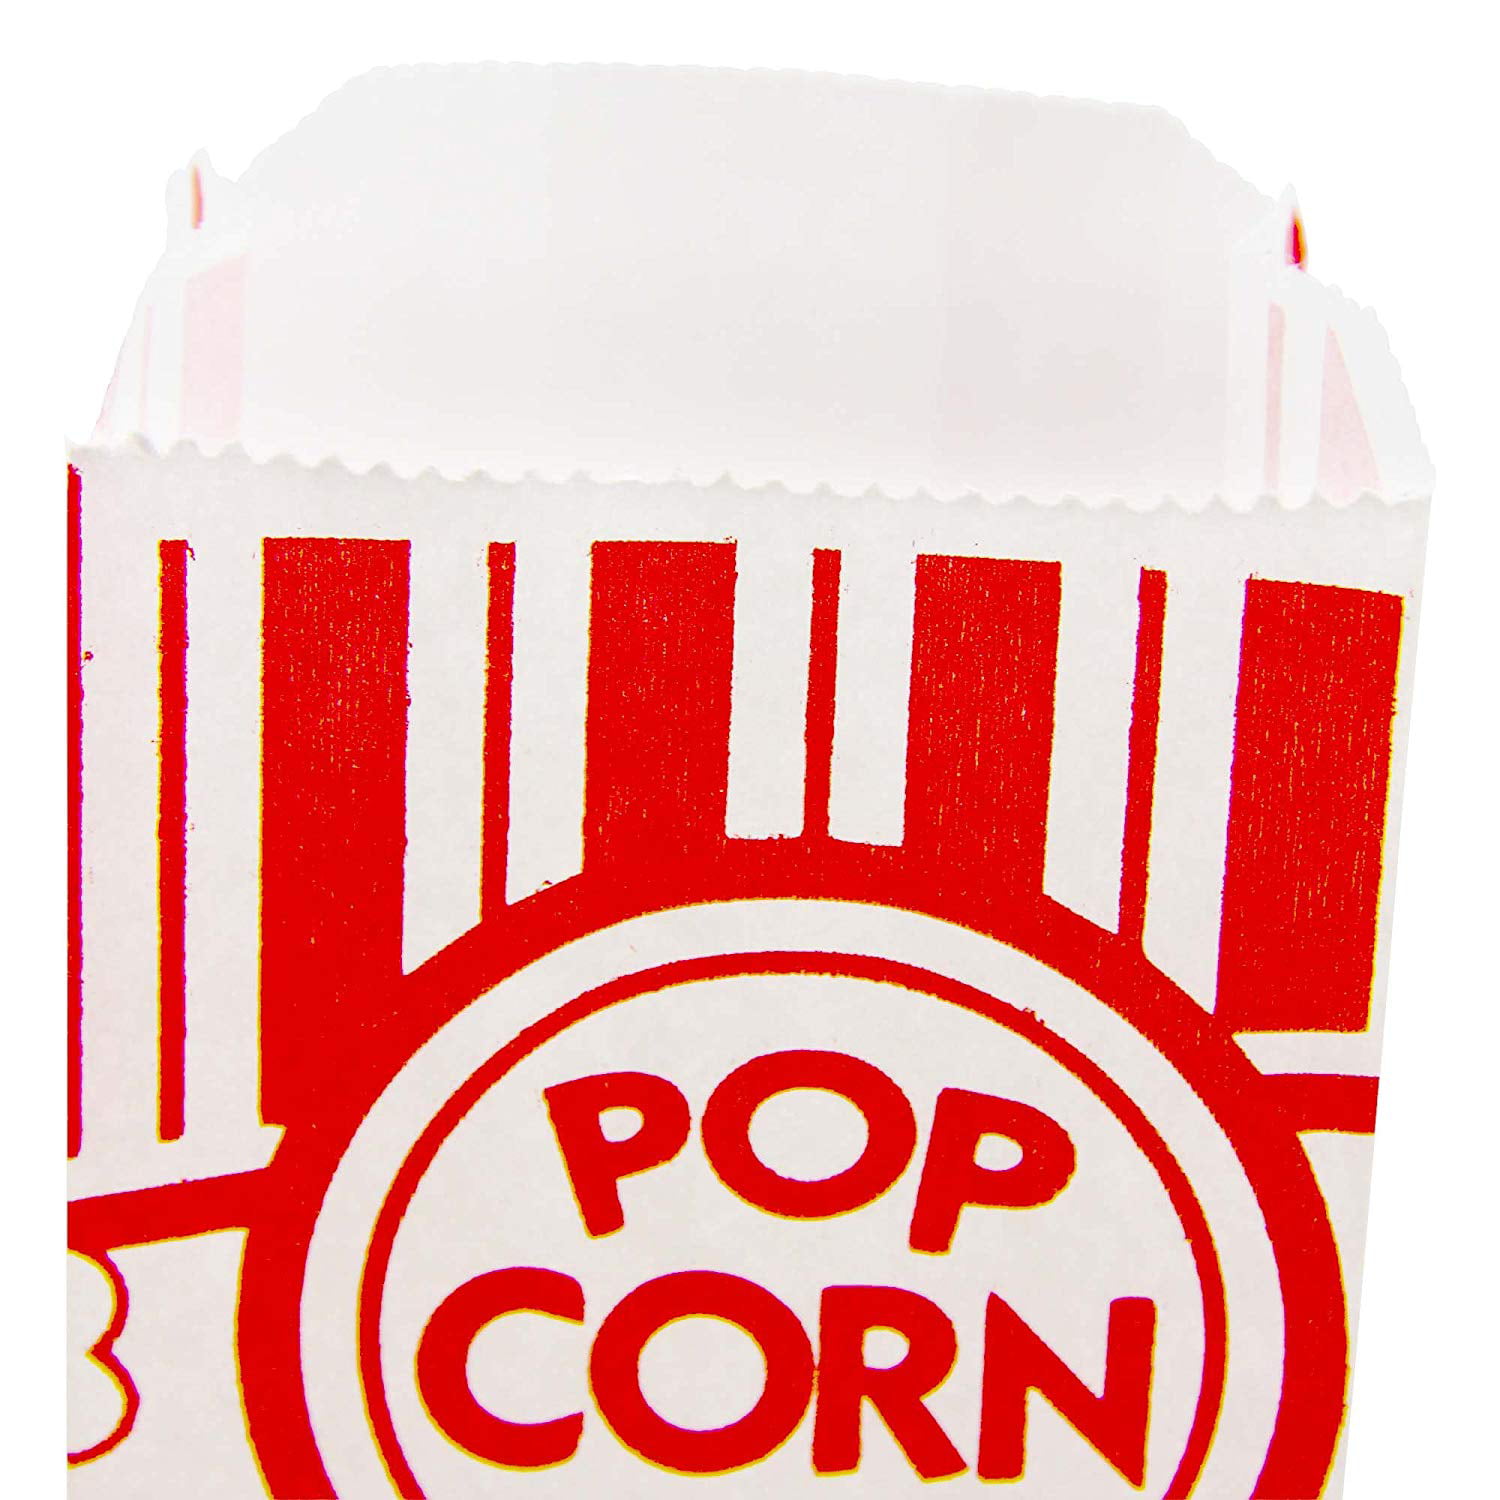 Sturdy Paper Bag 200 Popcorn Bags Large 2 Once Movies Perfect Size for Theater Popcorn Bags for Party by Liquor Sip Birthday Parties Celebration Great Carnival Light Snacking Bags